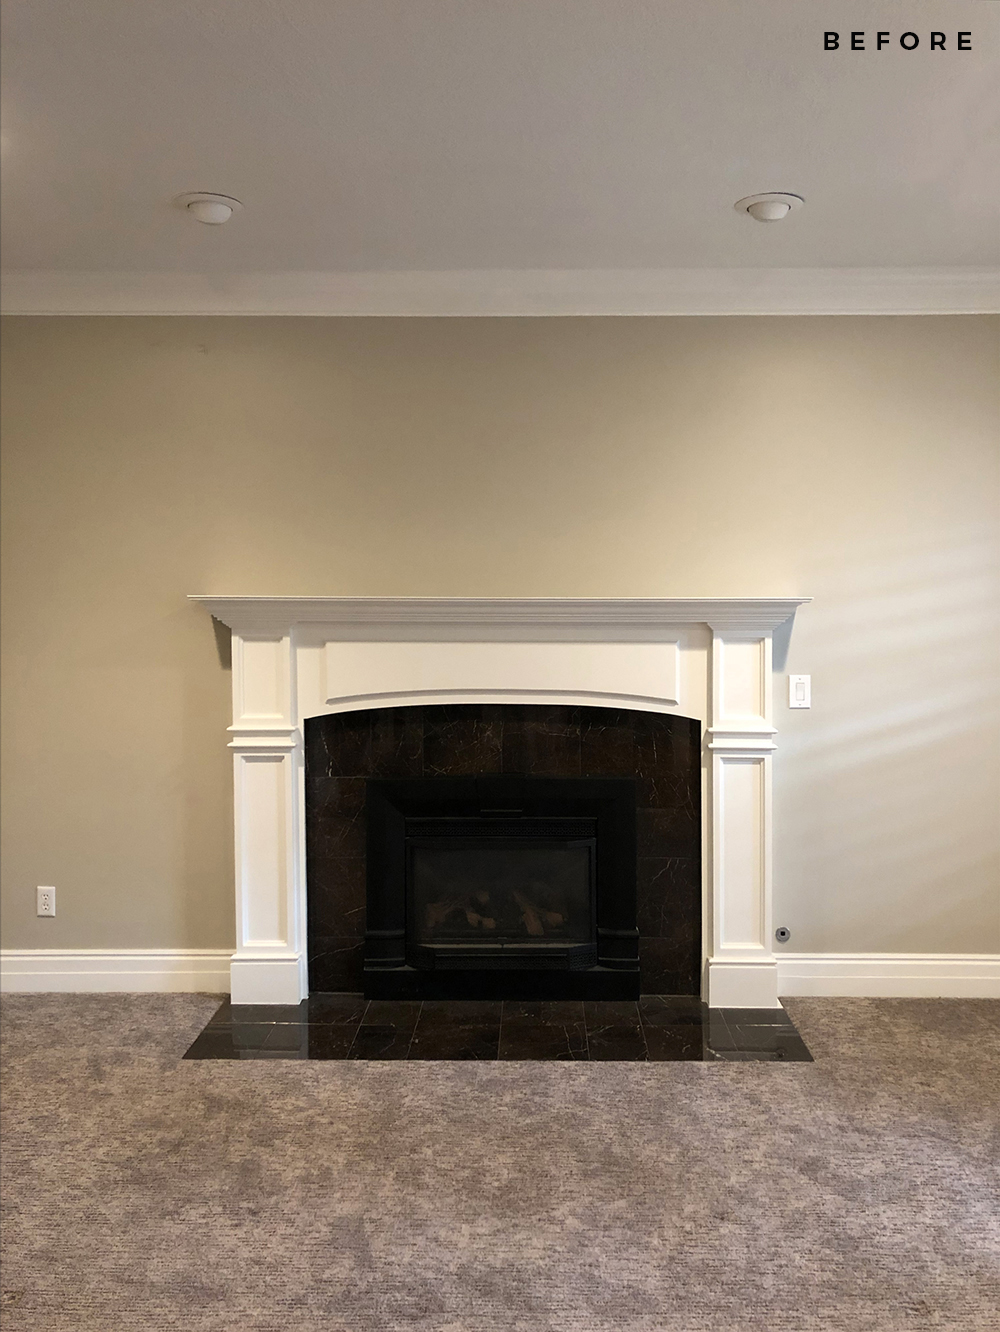 Wood Fireplace Inserts Lowes Best Of Fireplace Makeover Cast Mantel Options Room for Tuesday